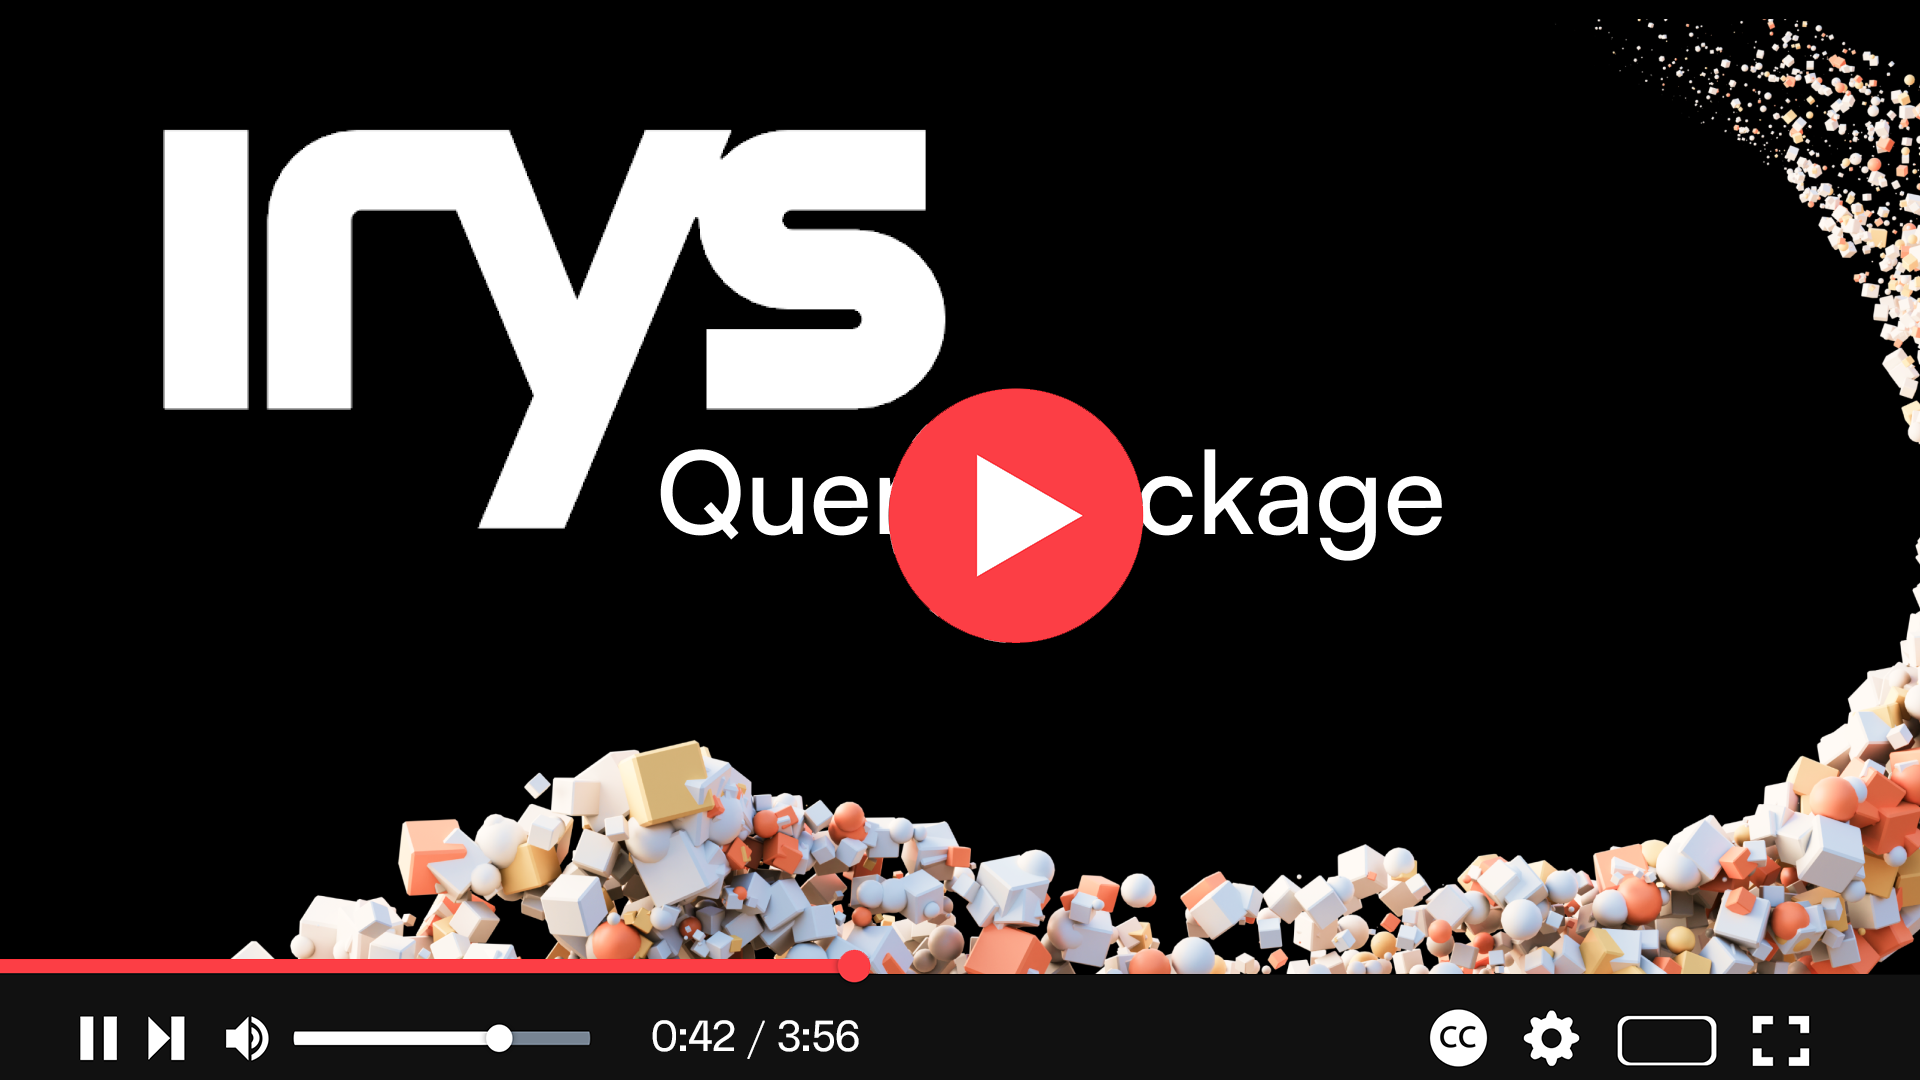 Irys query package